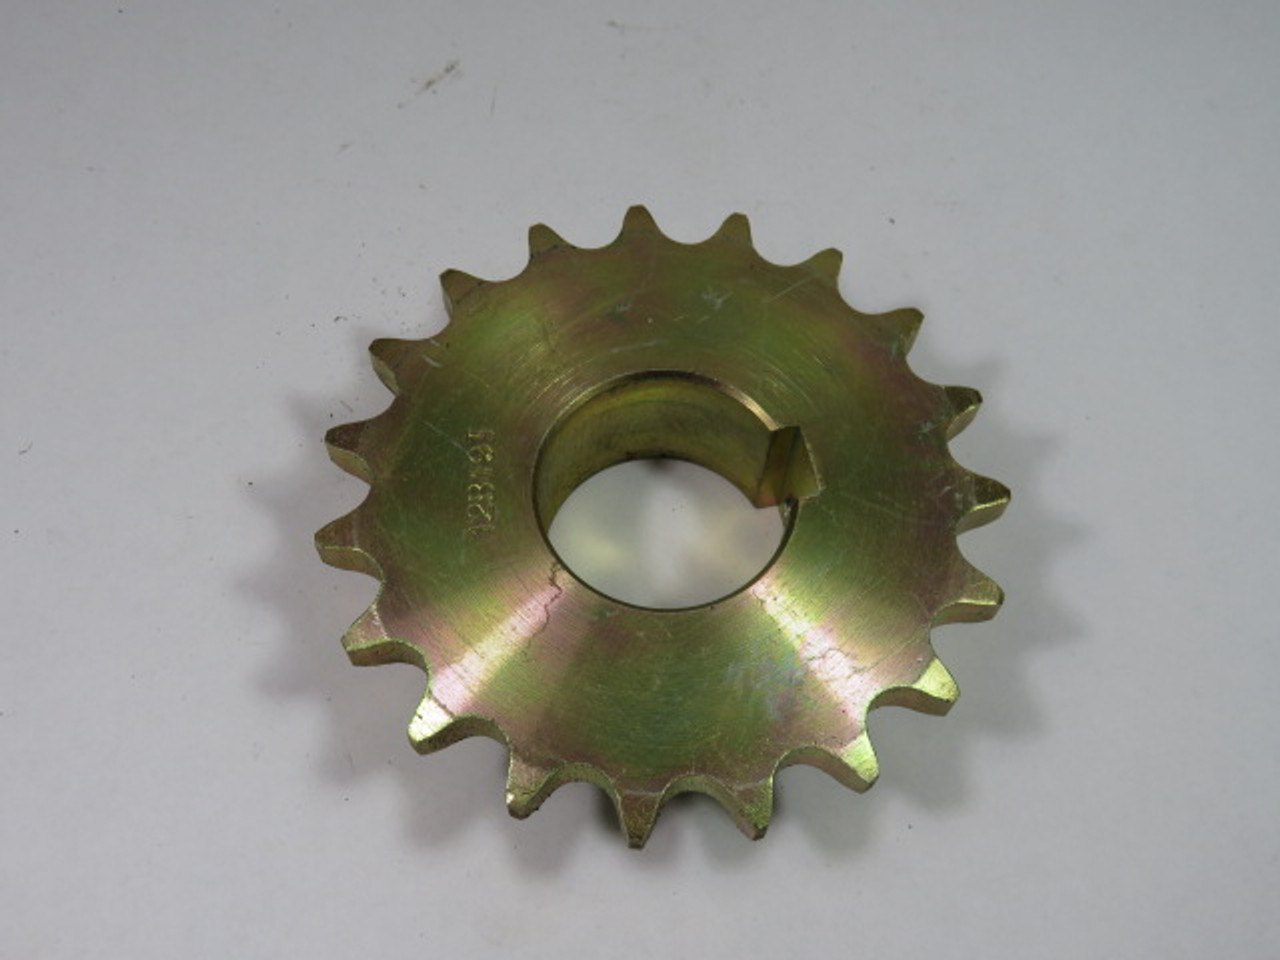 Generic 12B19T Roller Chain Sprocket 1.75" Bore 19 Teeth 12 Chain USED